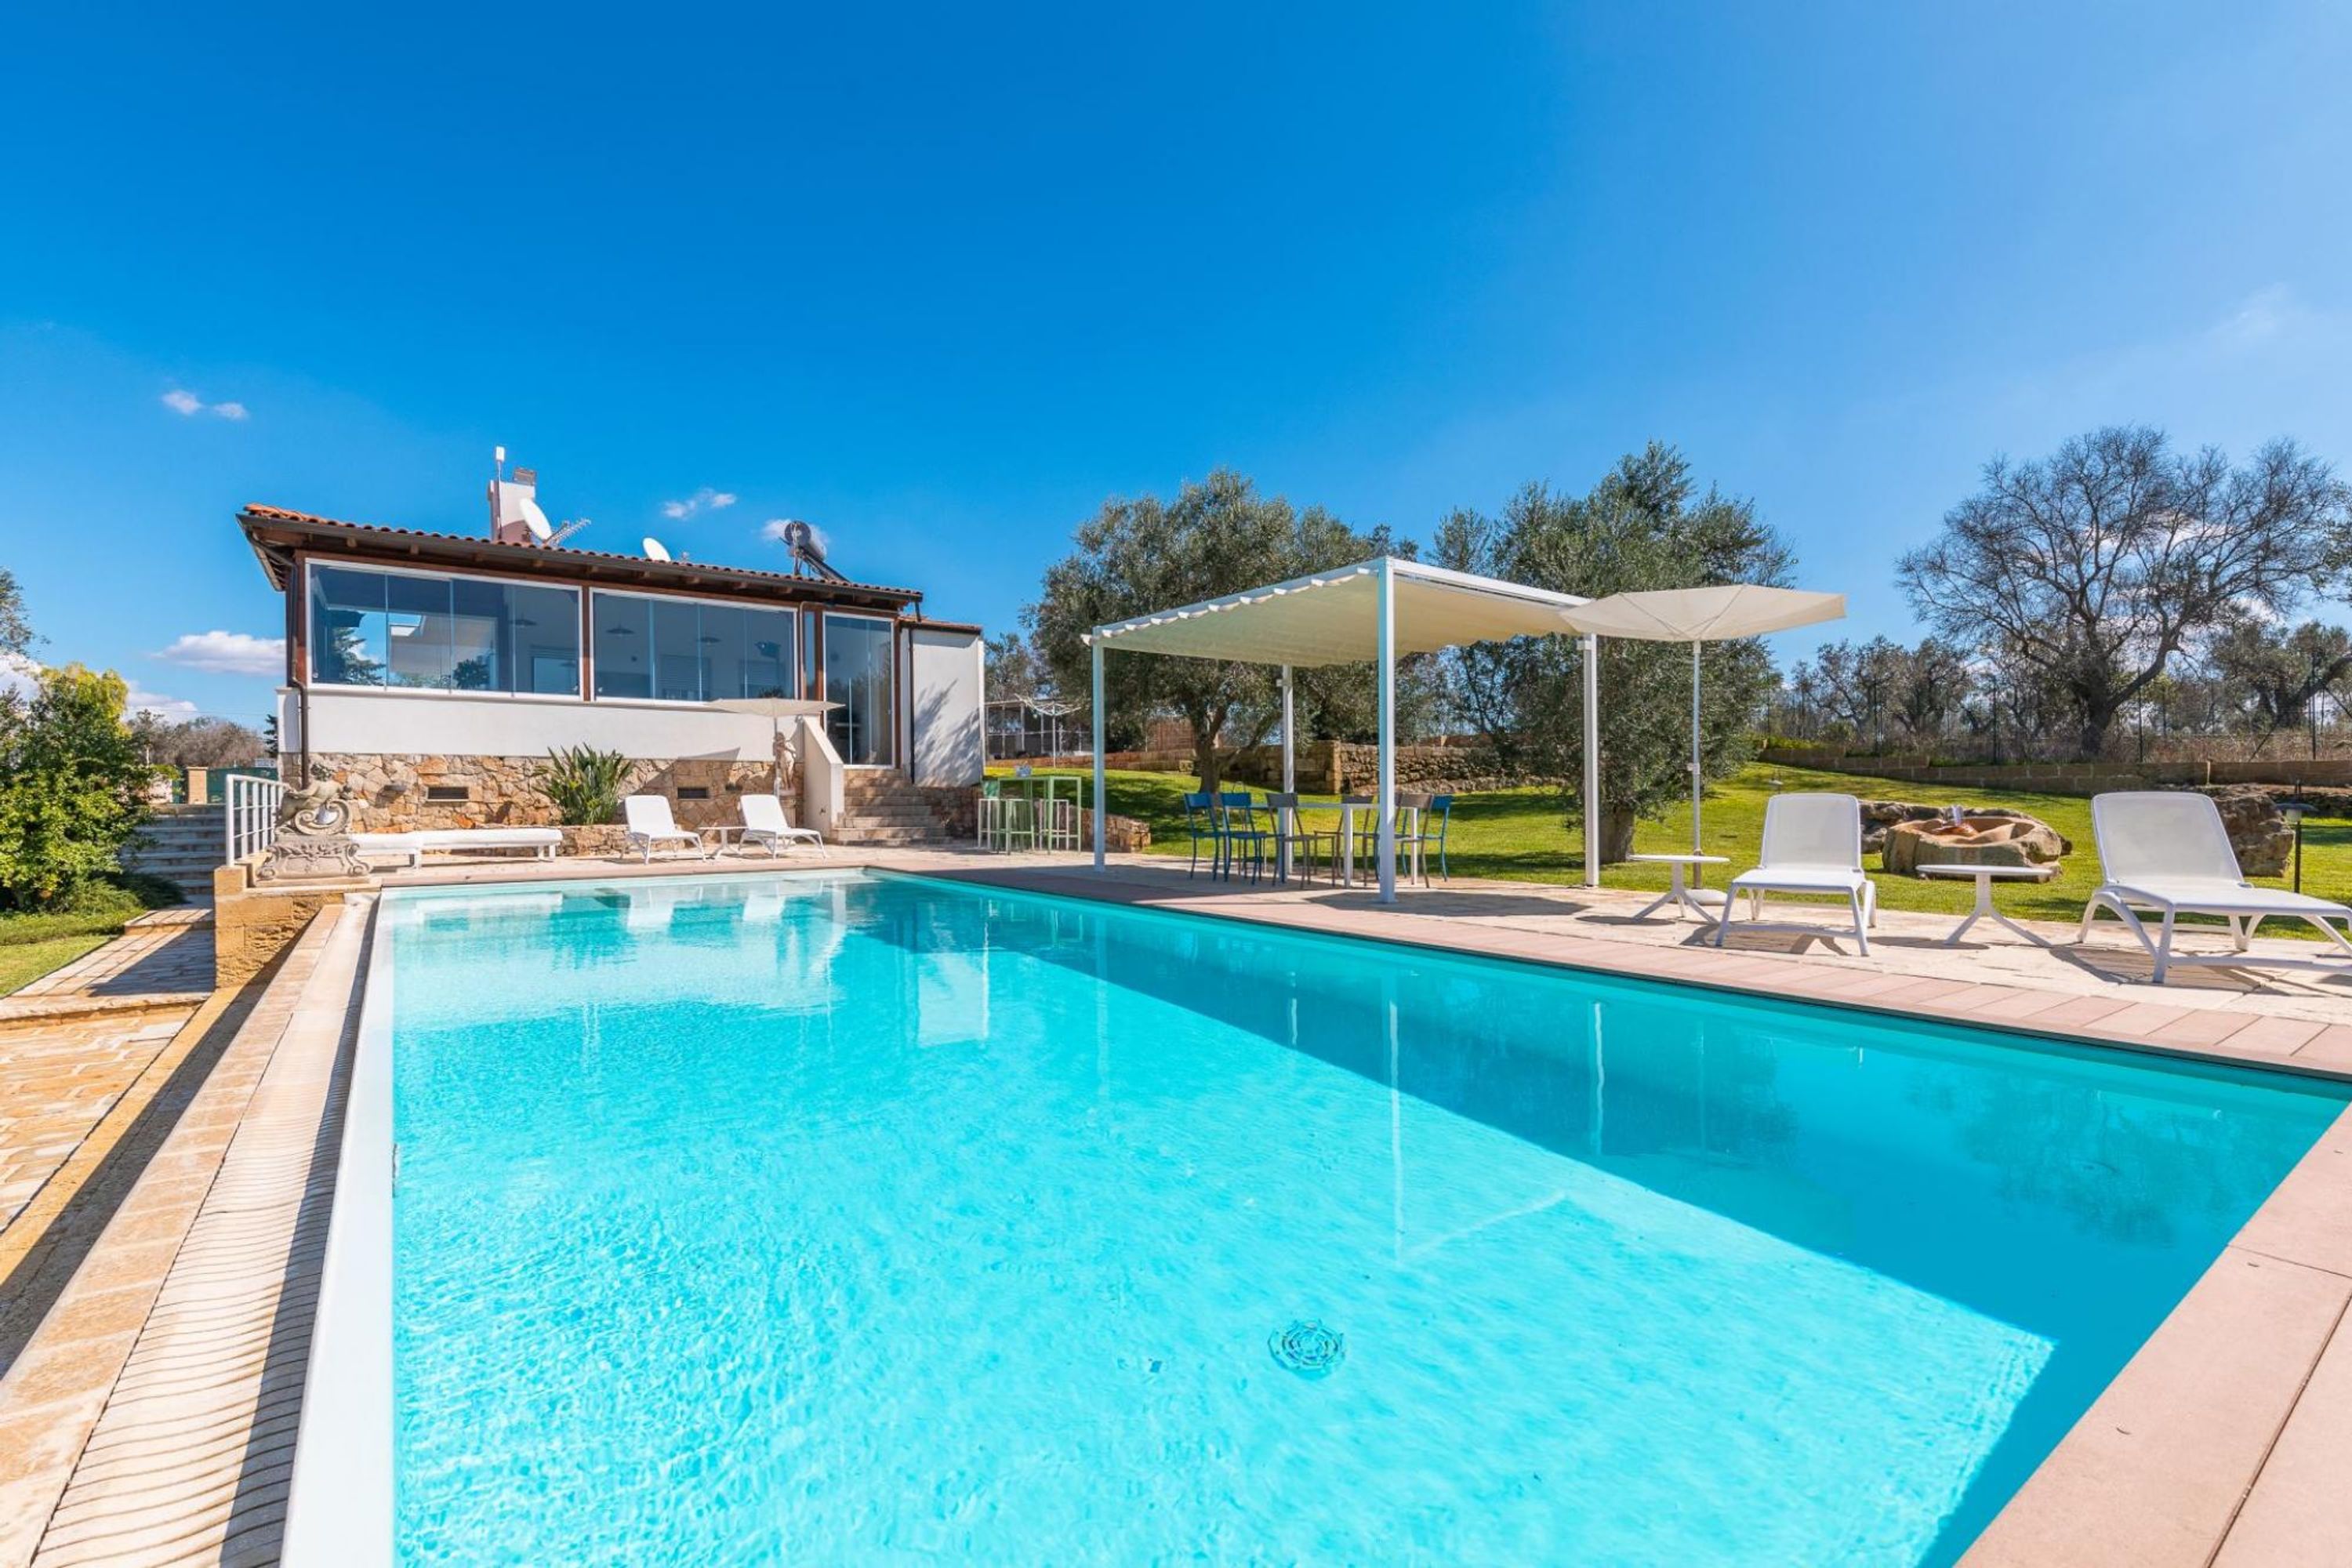 Property Image 1 - Villa with large garden and pool  in the Hinterland of Salento  located in Collepasso -Villa Micasa